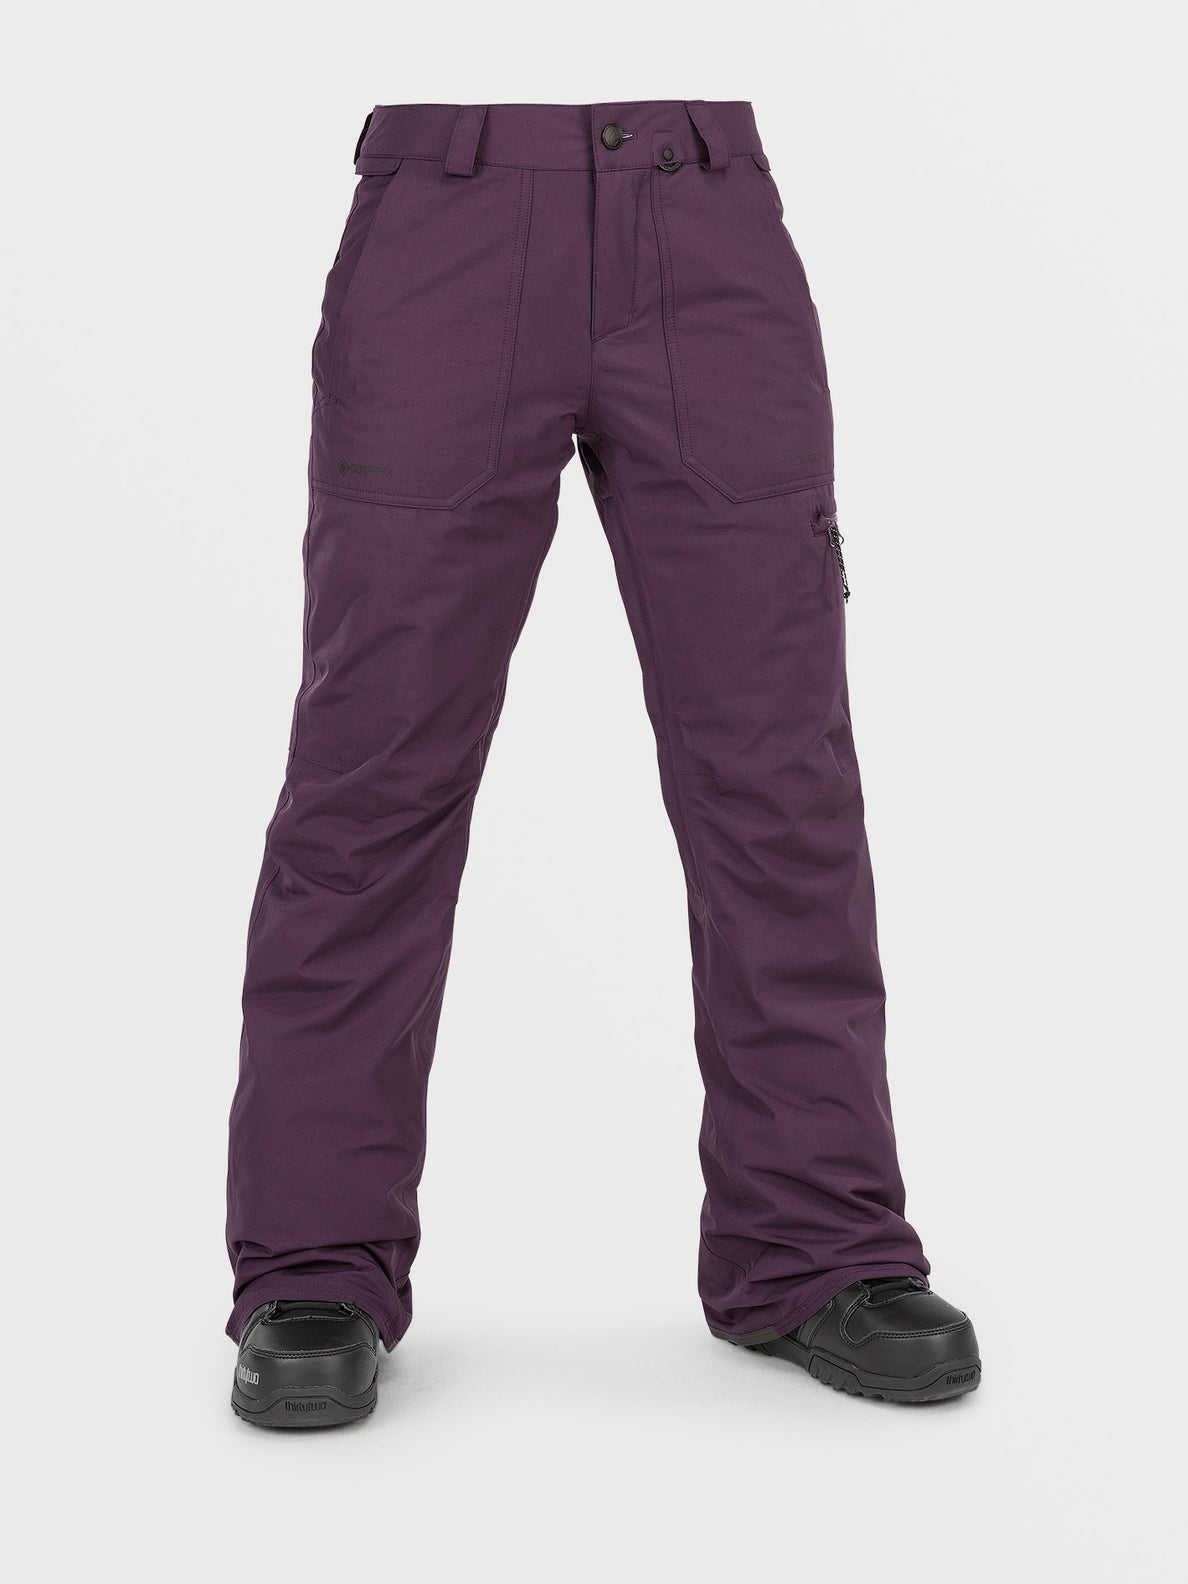 Womens Knox Insulated Gore-Tex Pants - Blackberry (H1252400_BRY) [F]